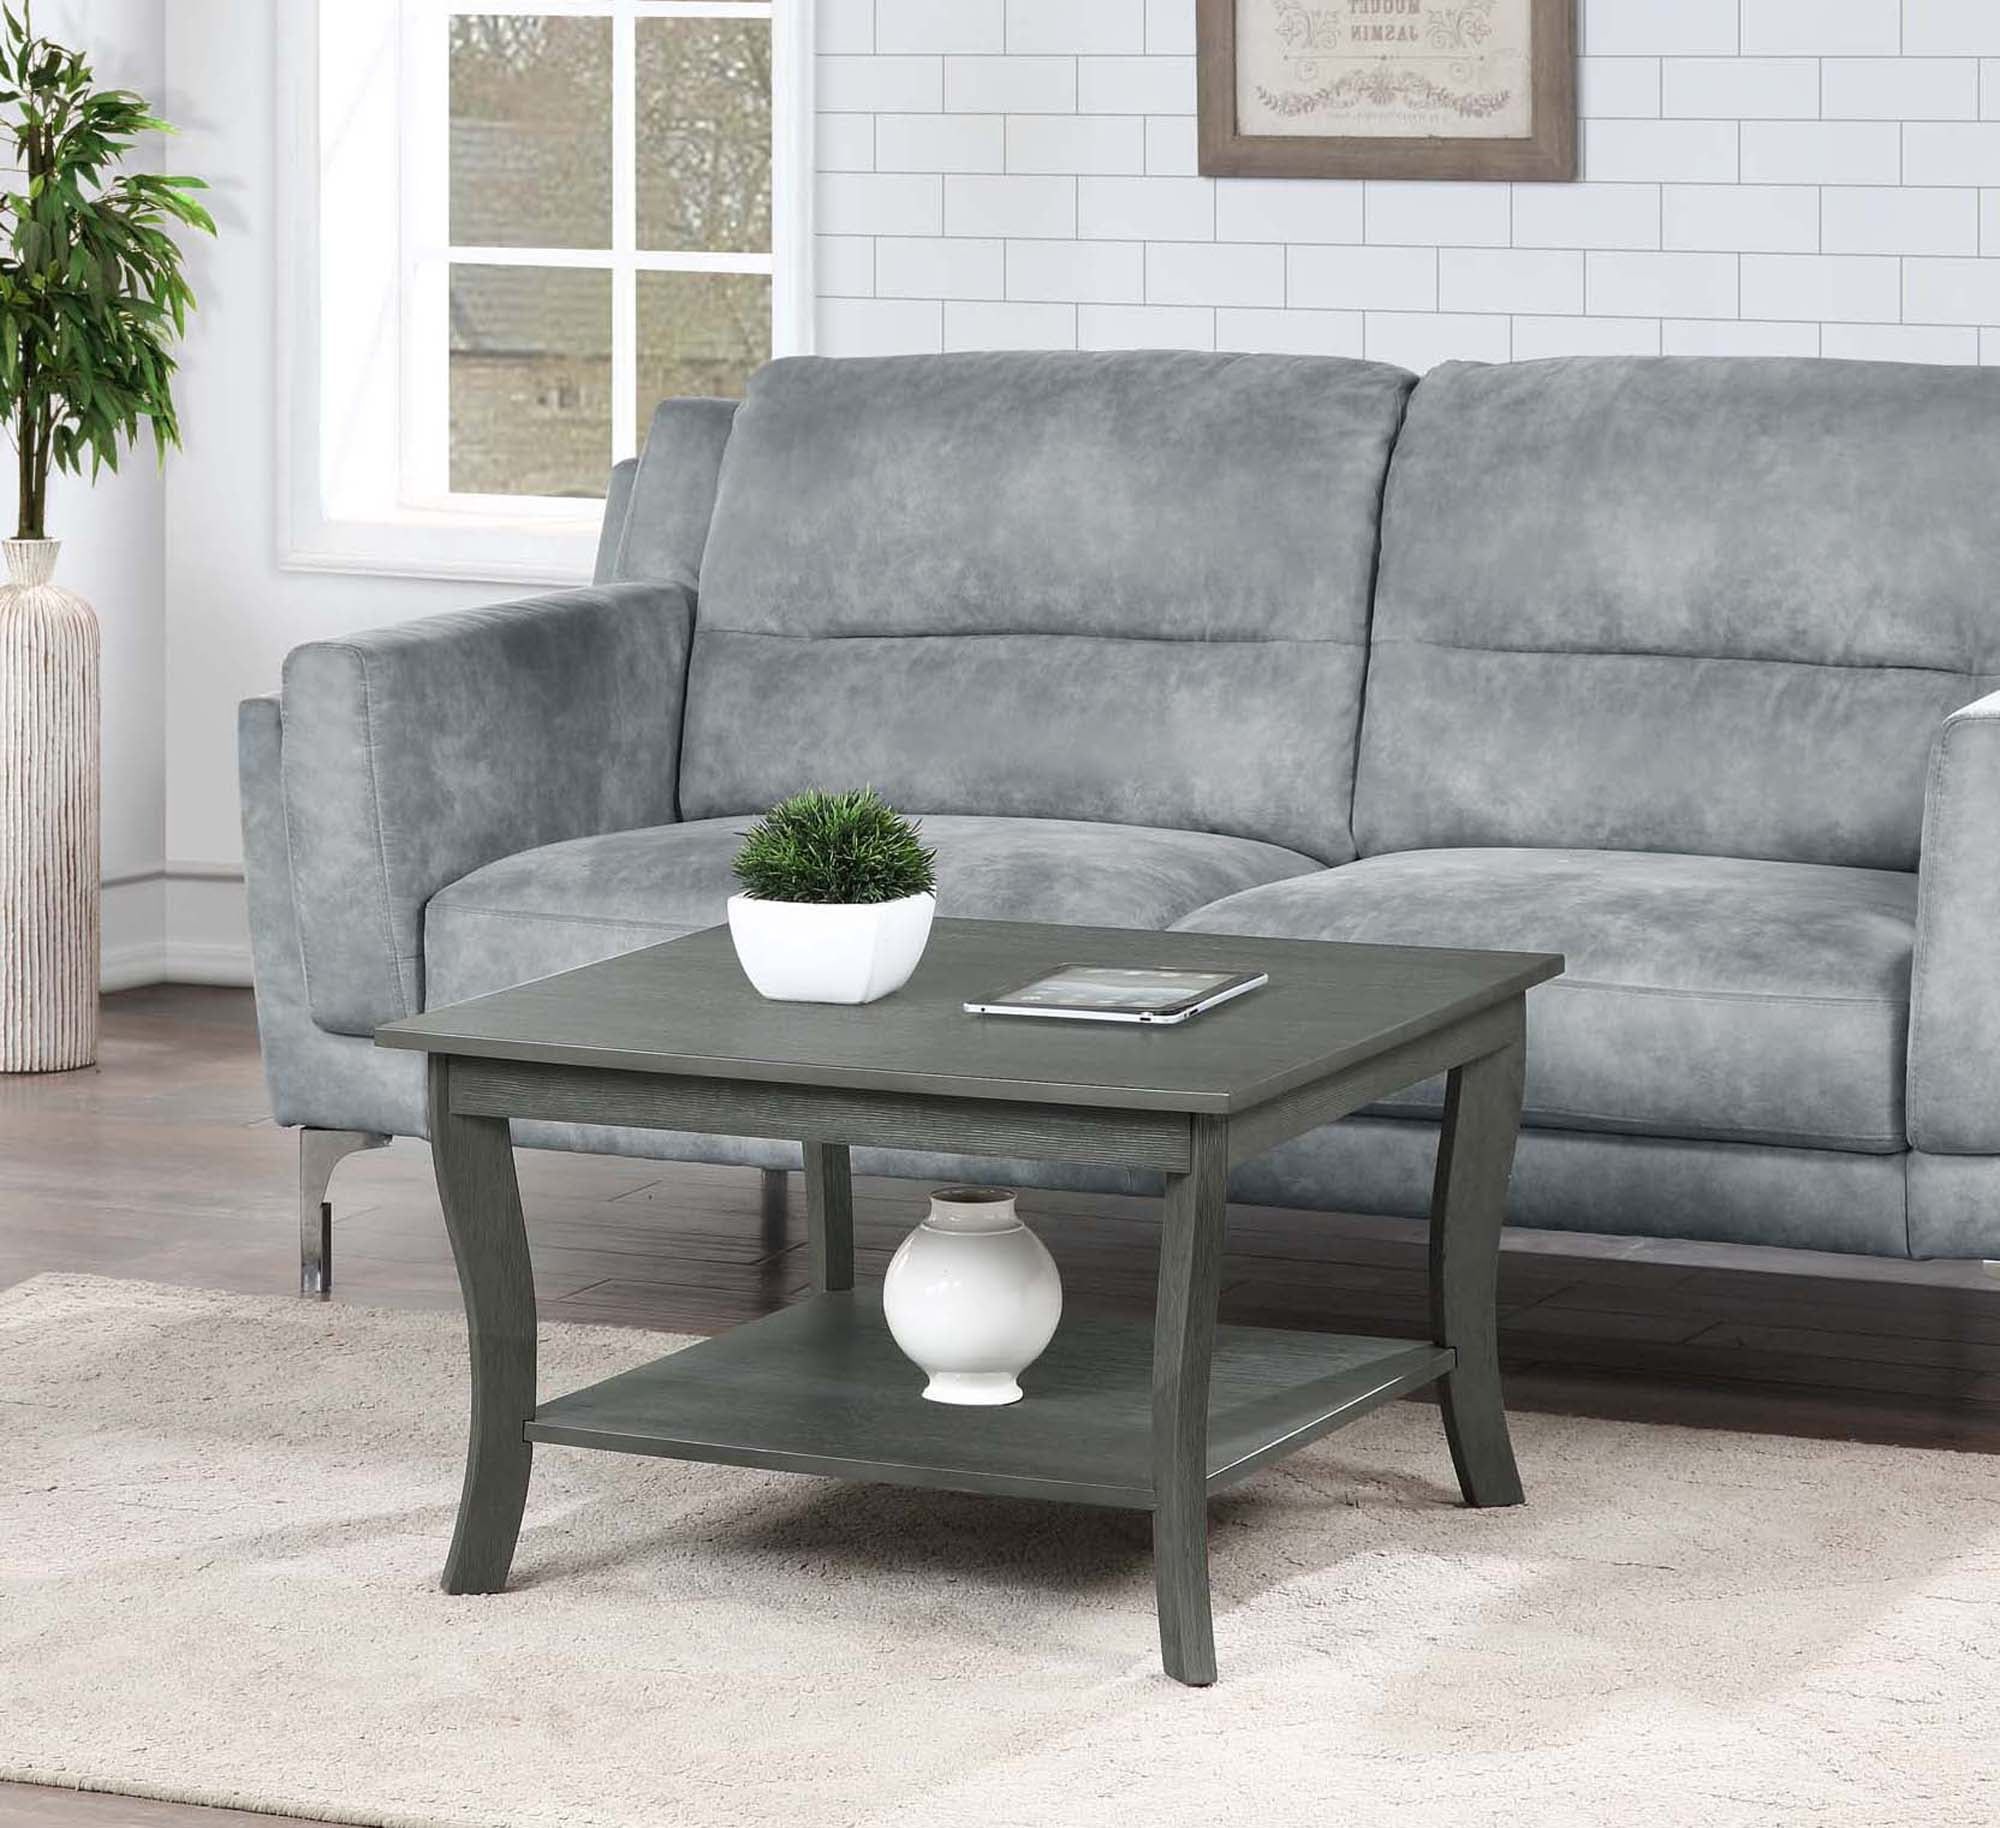 Convenience Concepts American Heritage Square Coffee Table, Multiple With Regard To Transitional Square Coffee Tables (Gallery 6 of 20)